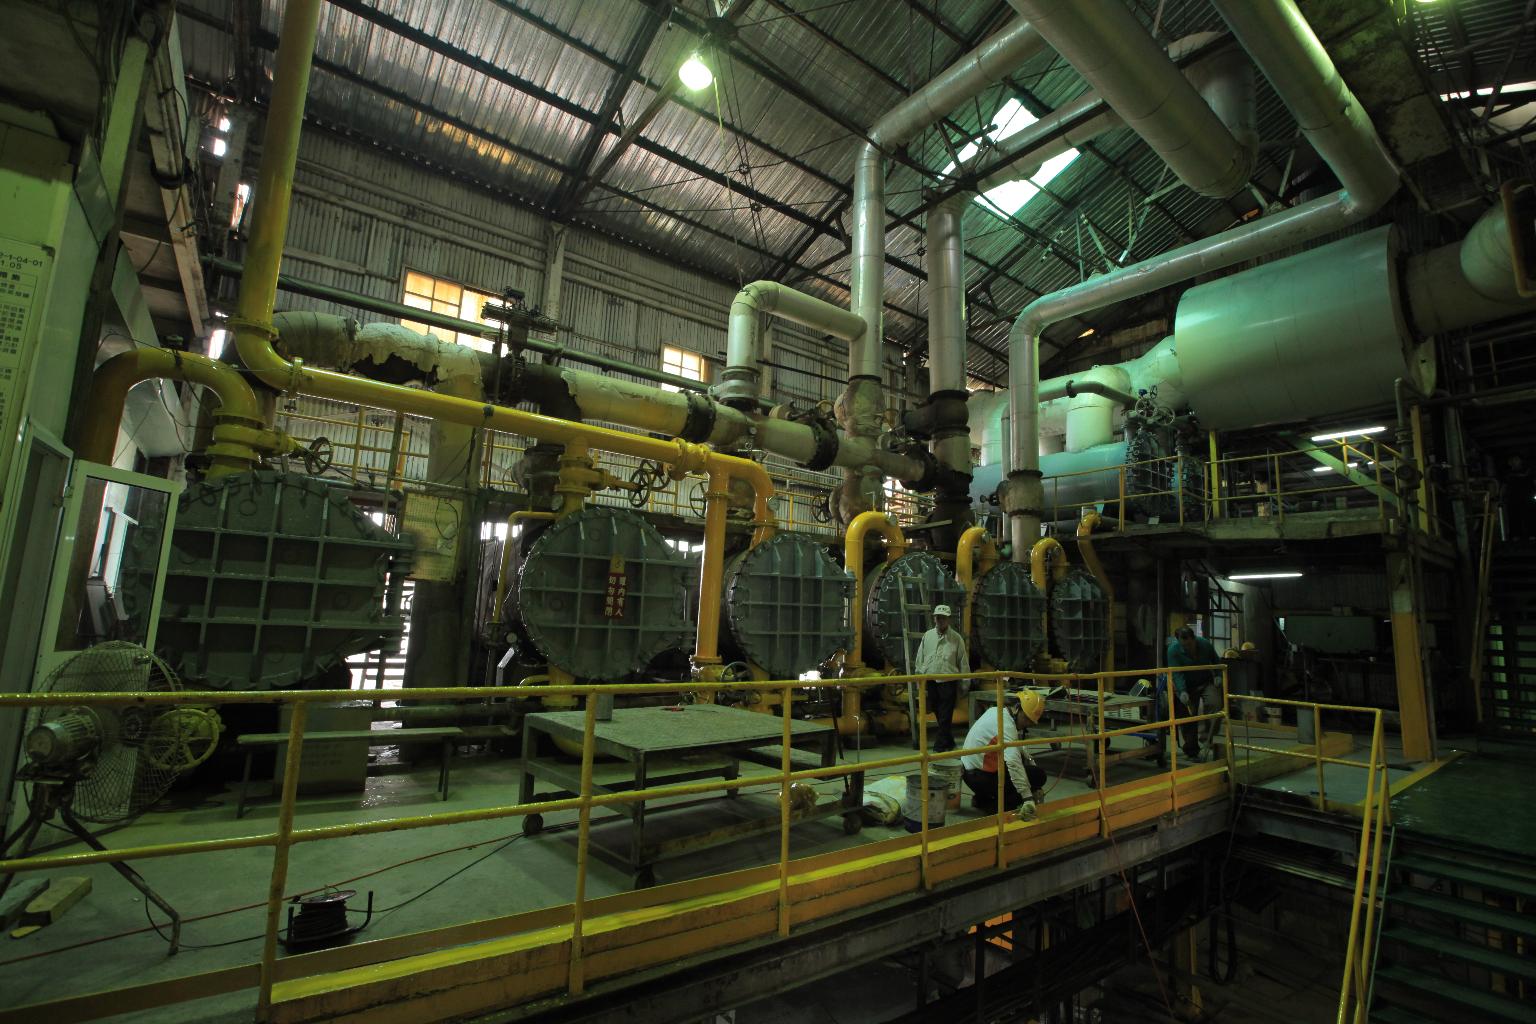 CHP (combined heat and power) equipment in the sugar factory.